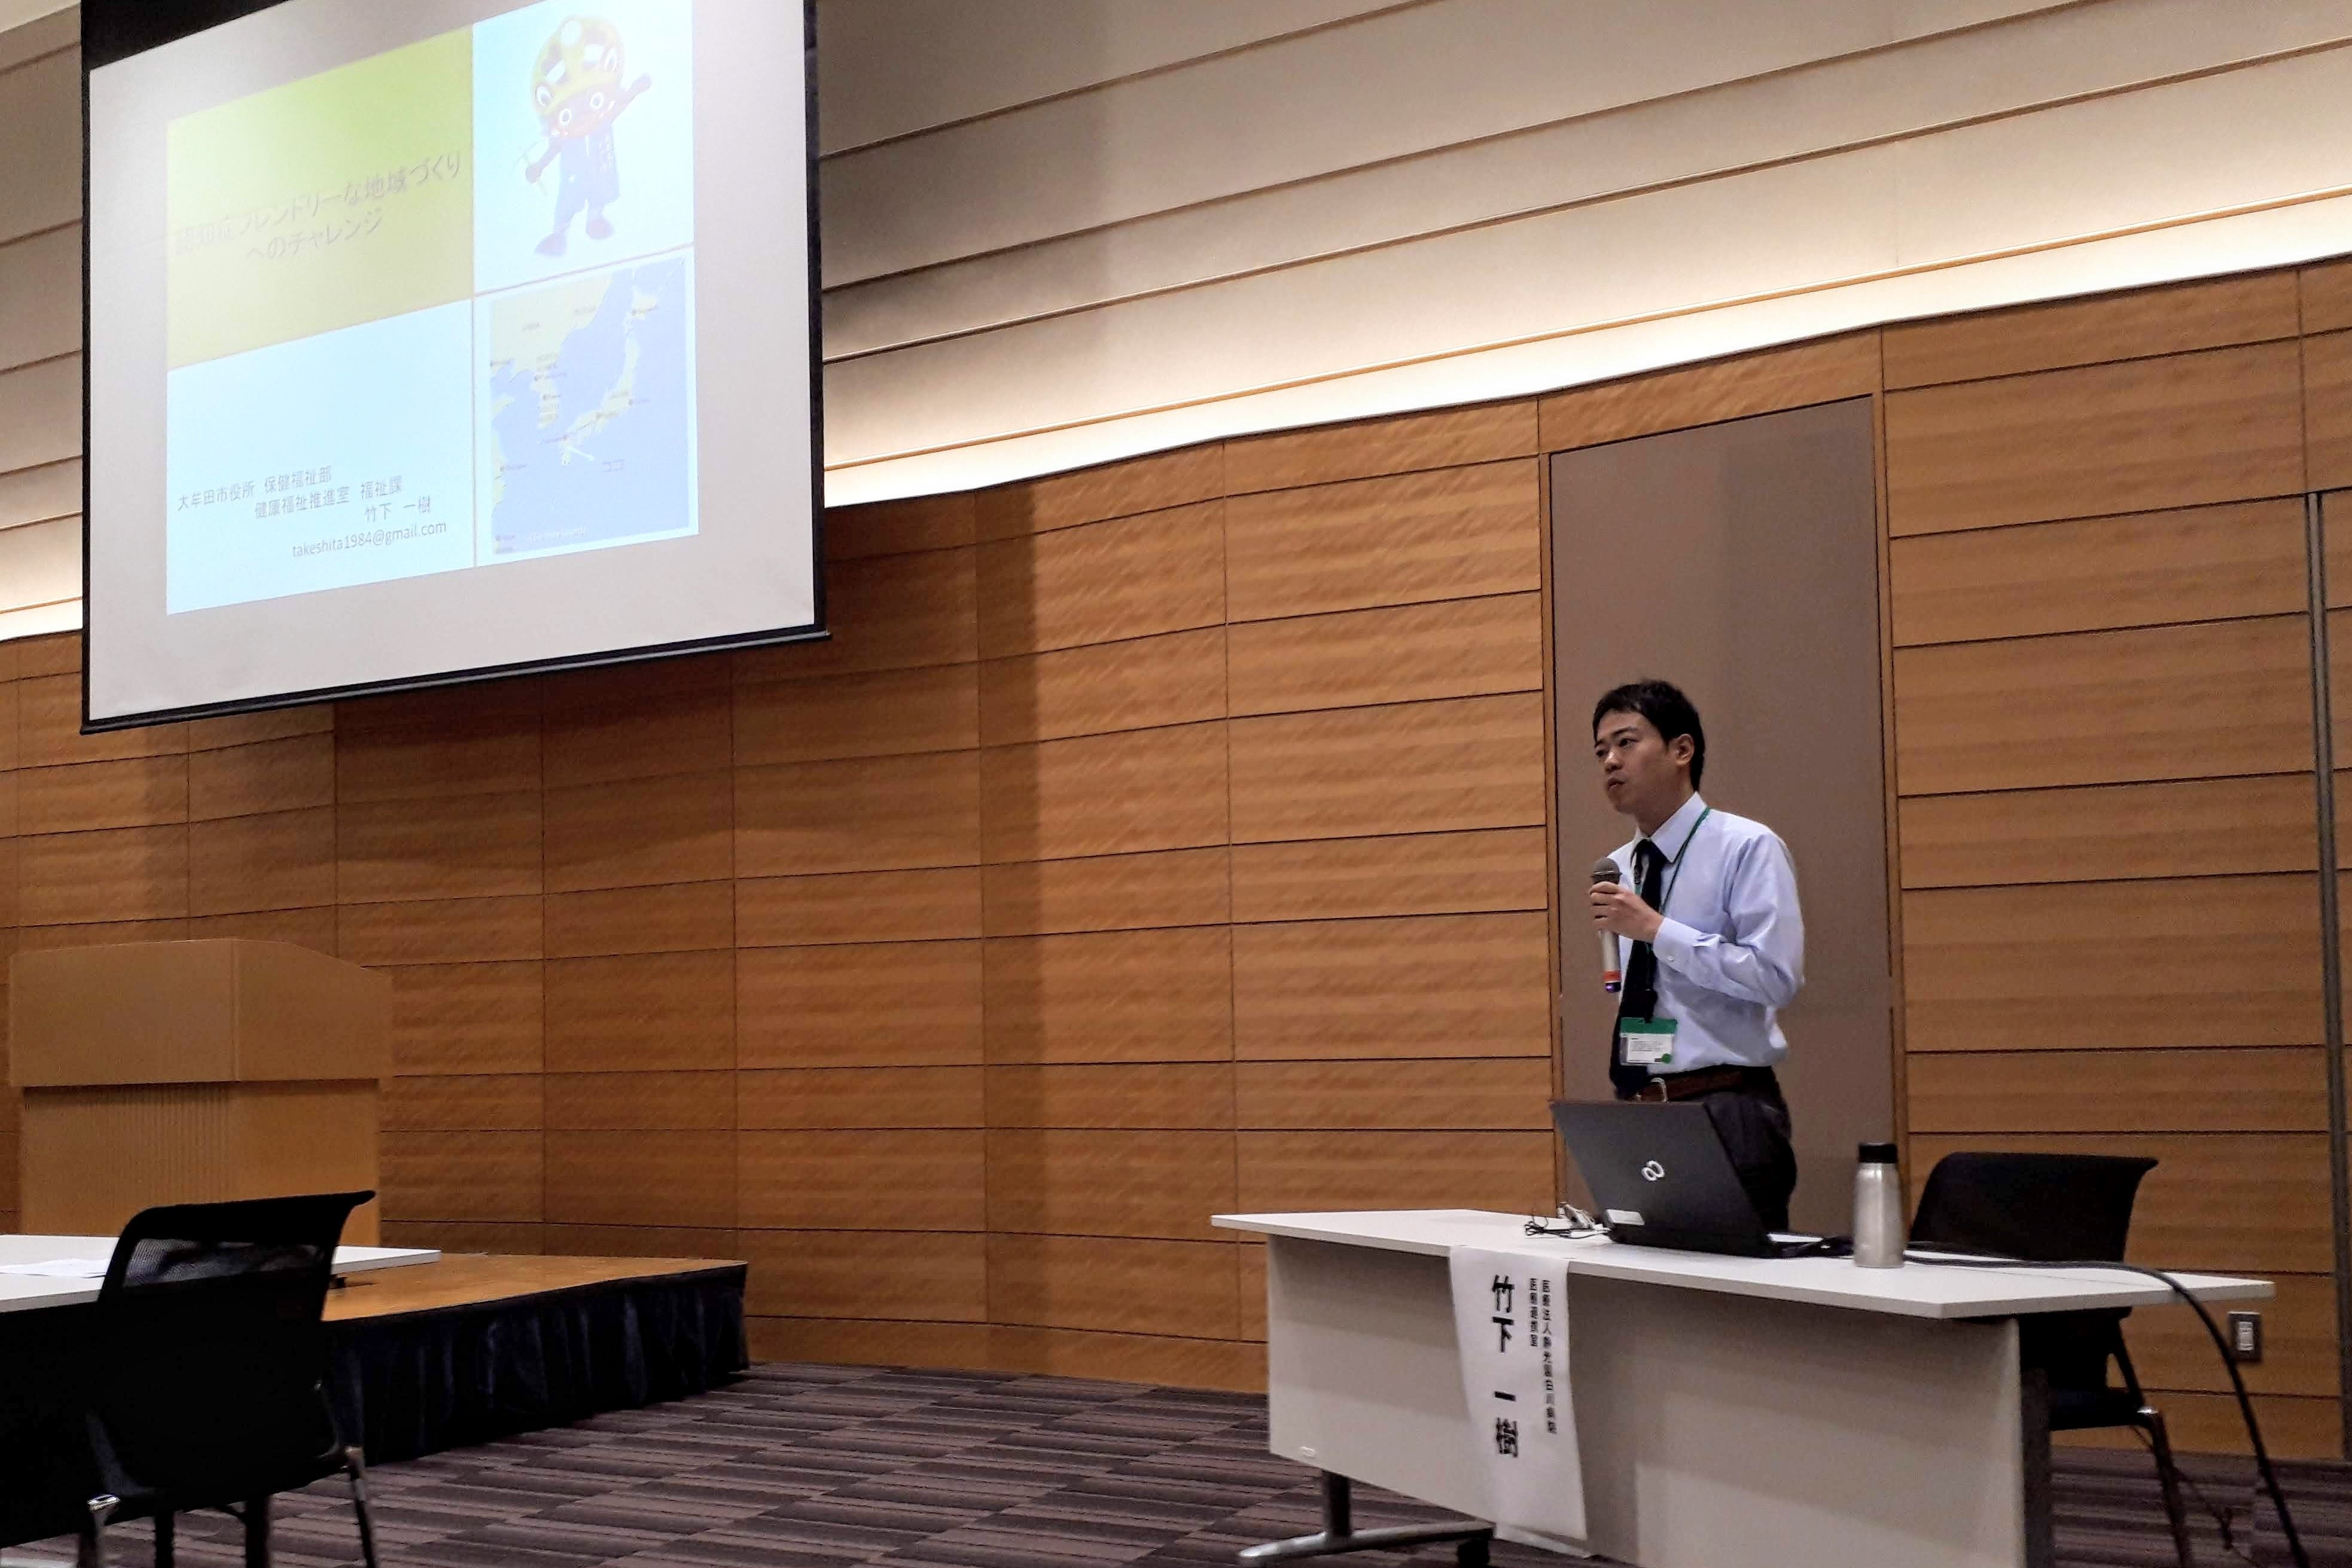 [Event Report] Eleventh session of the Diet Study Group on Dementia (June 11, 2019)